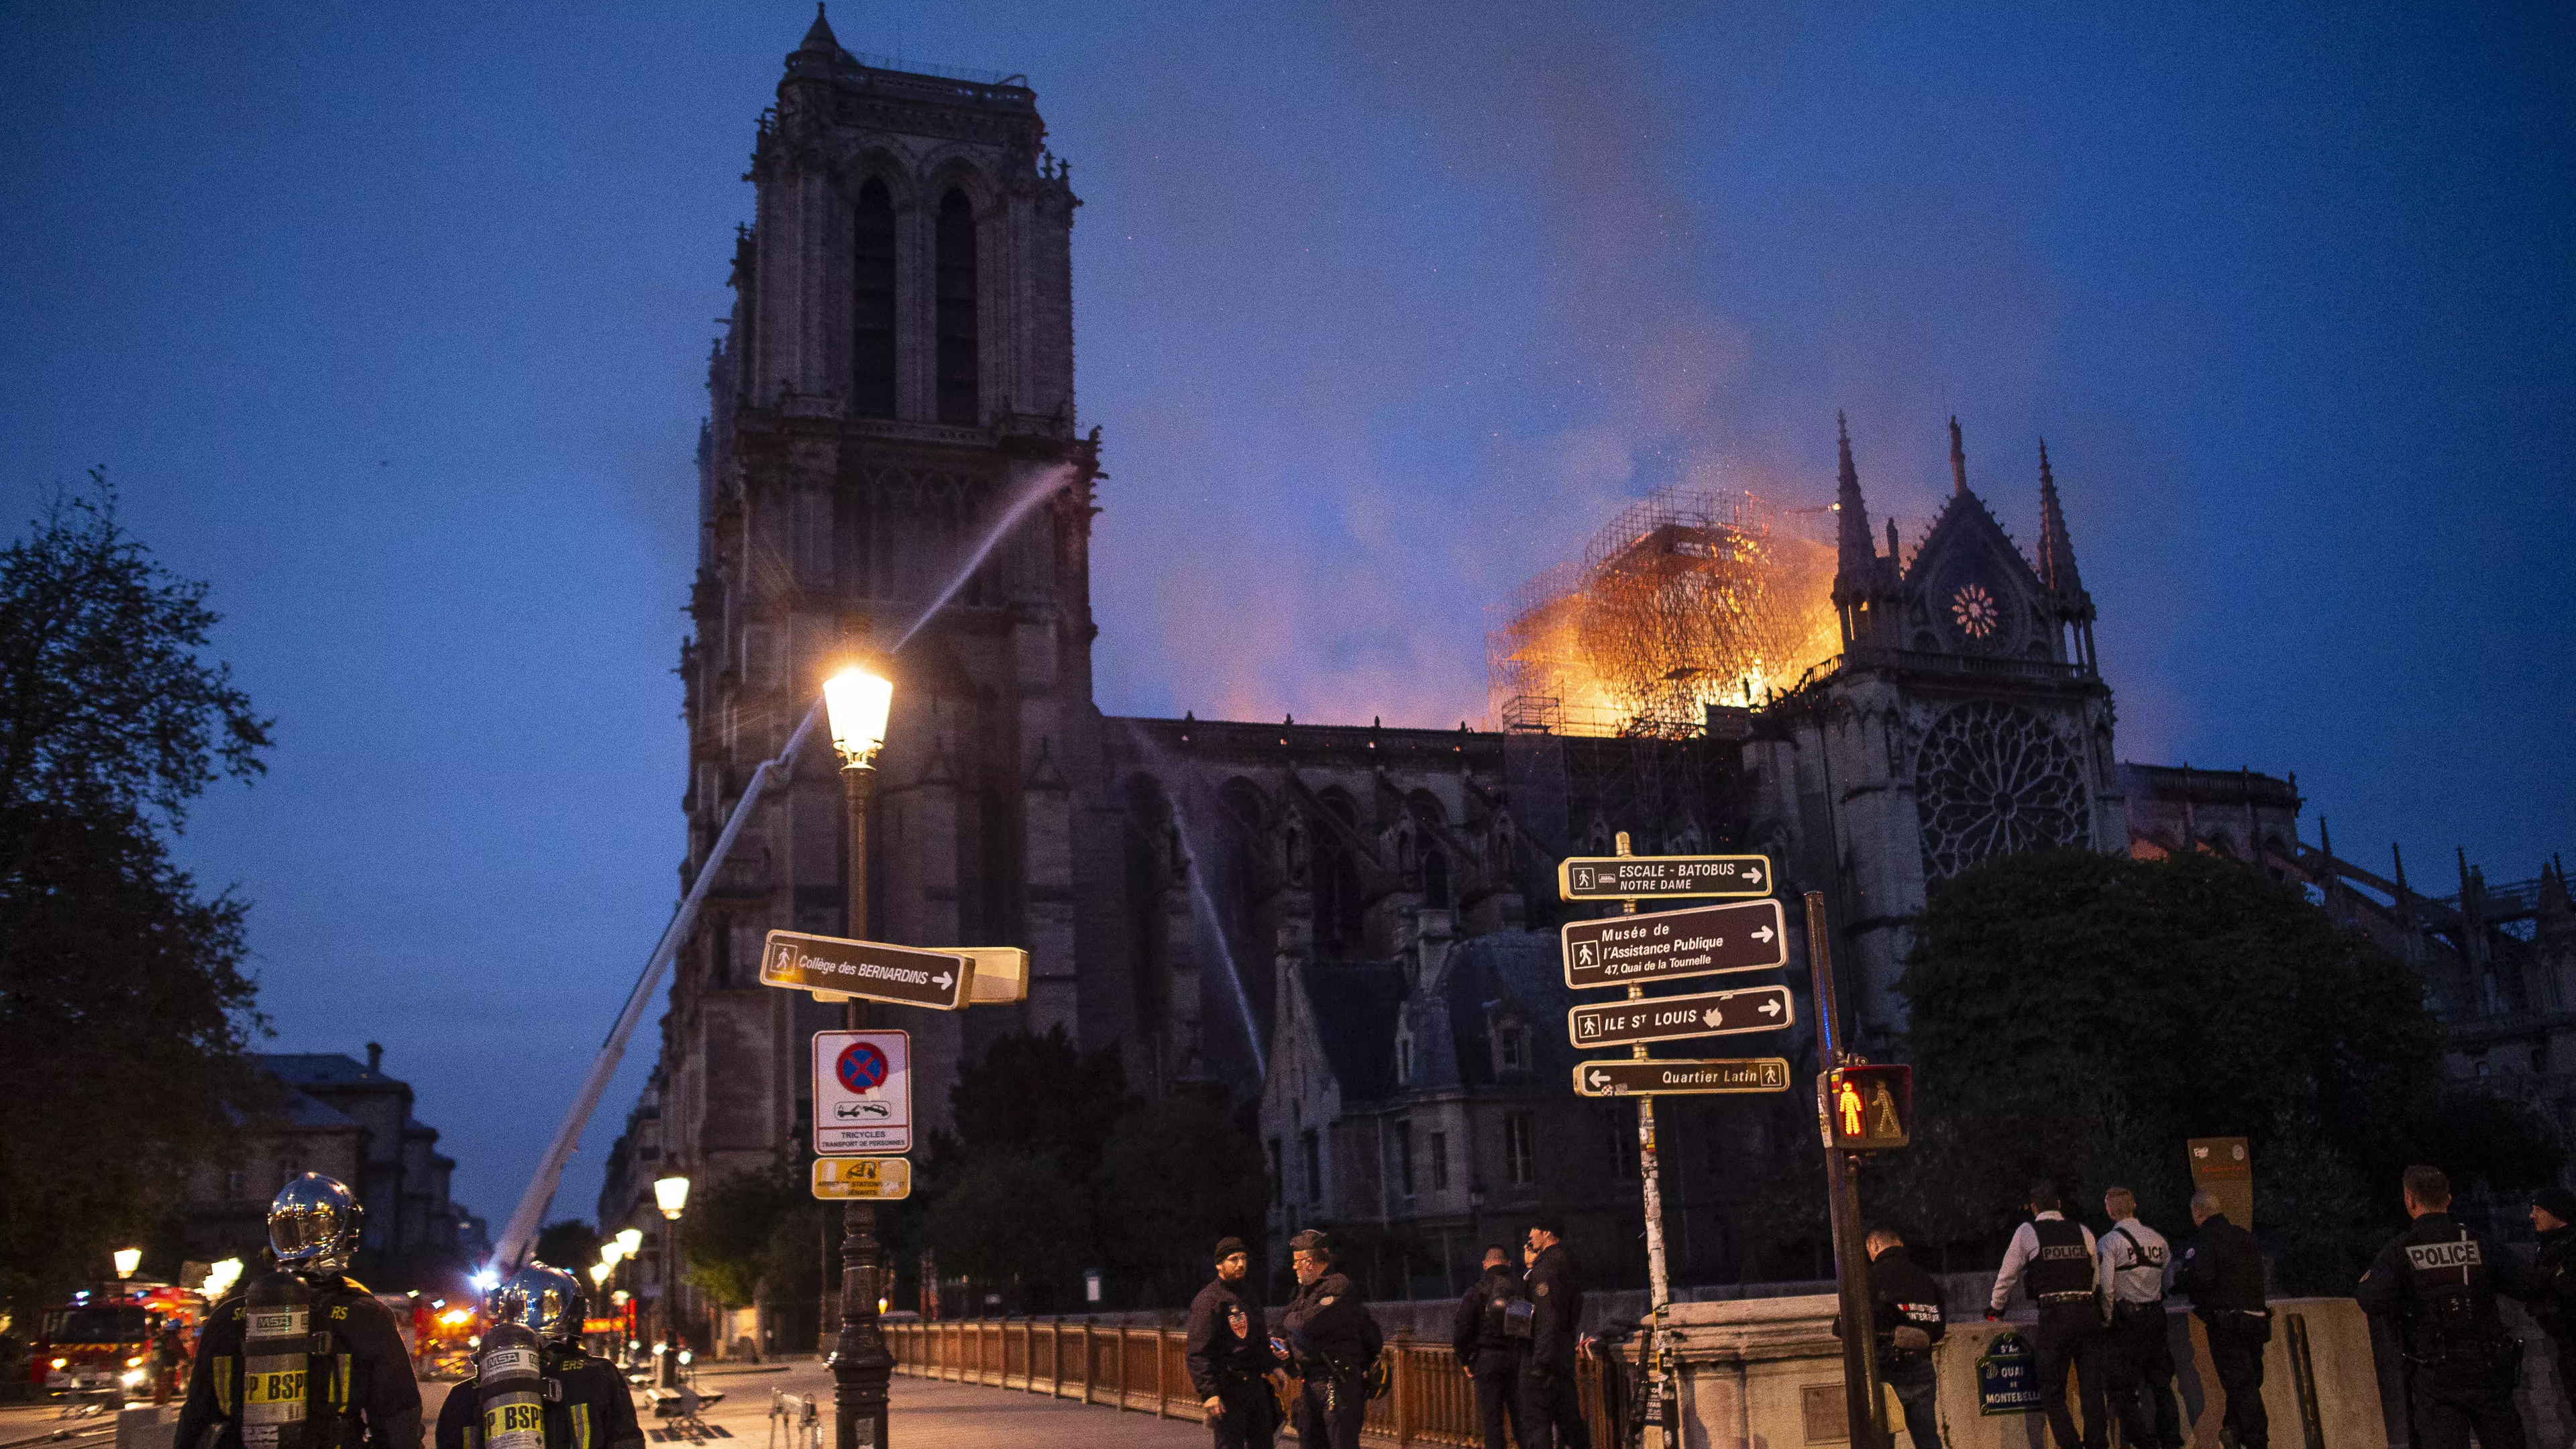 Pictures Reveal The Devastating Extent Of The Damage Inside Notre Dame Cathedral